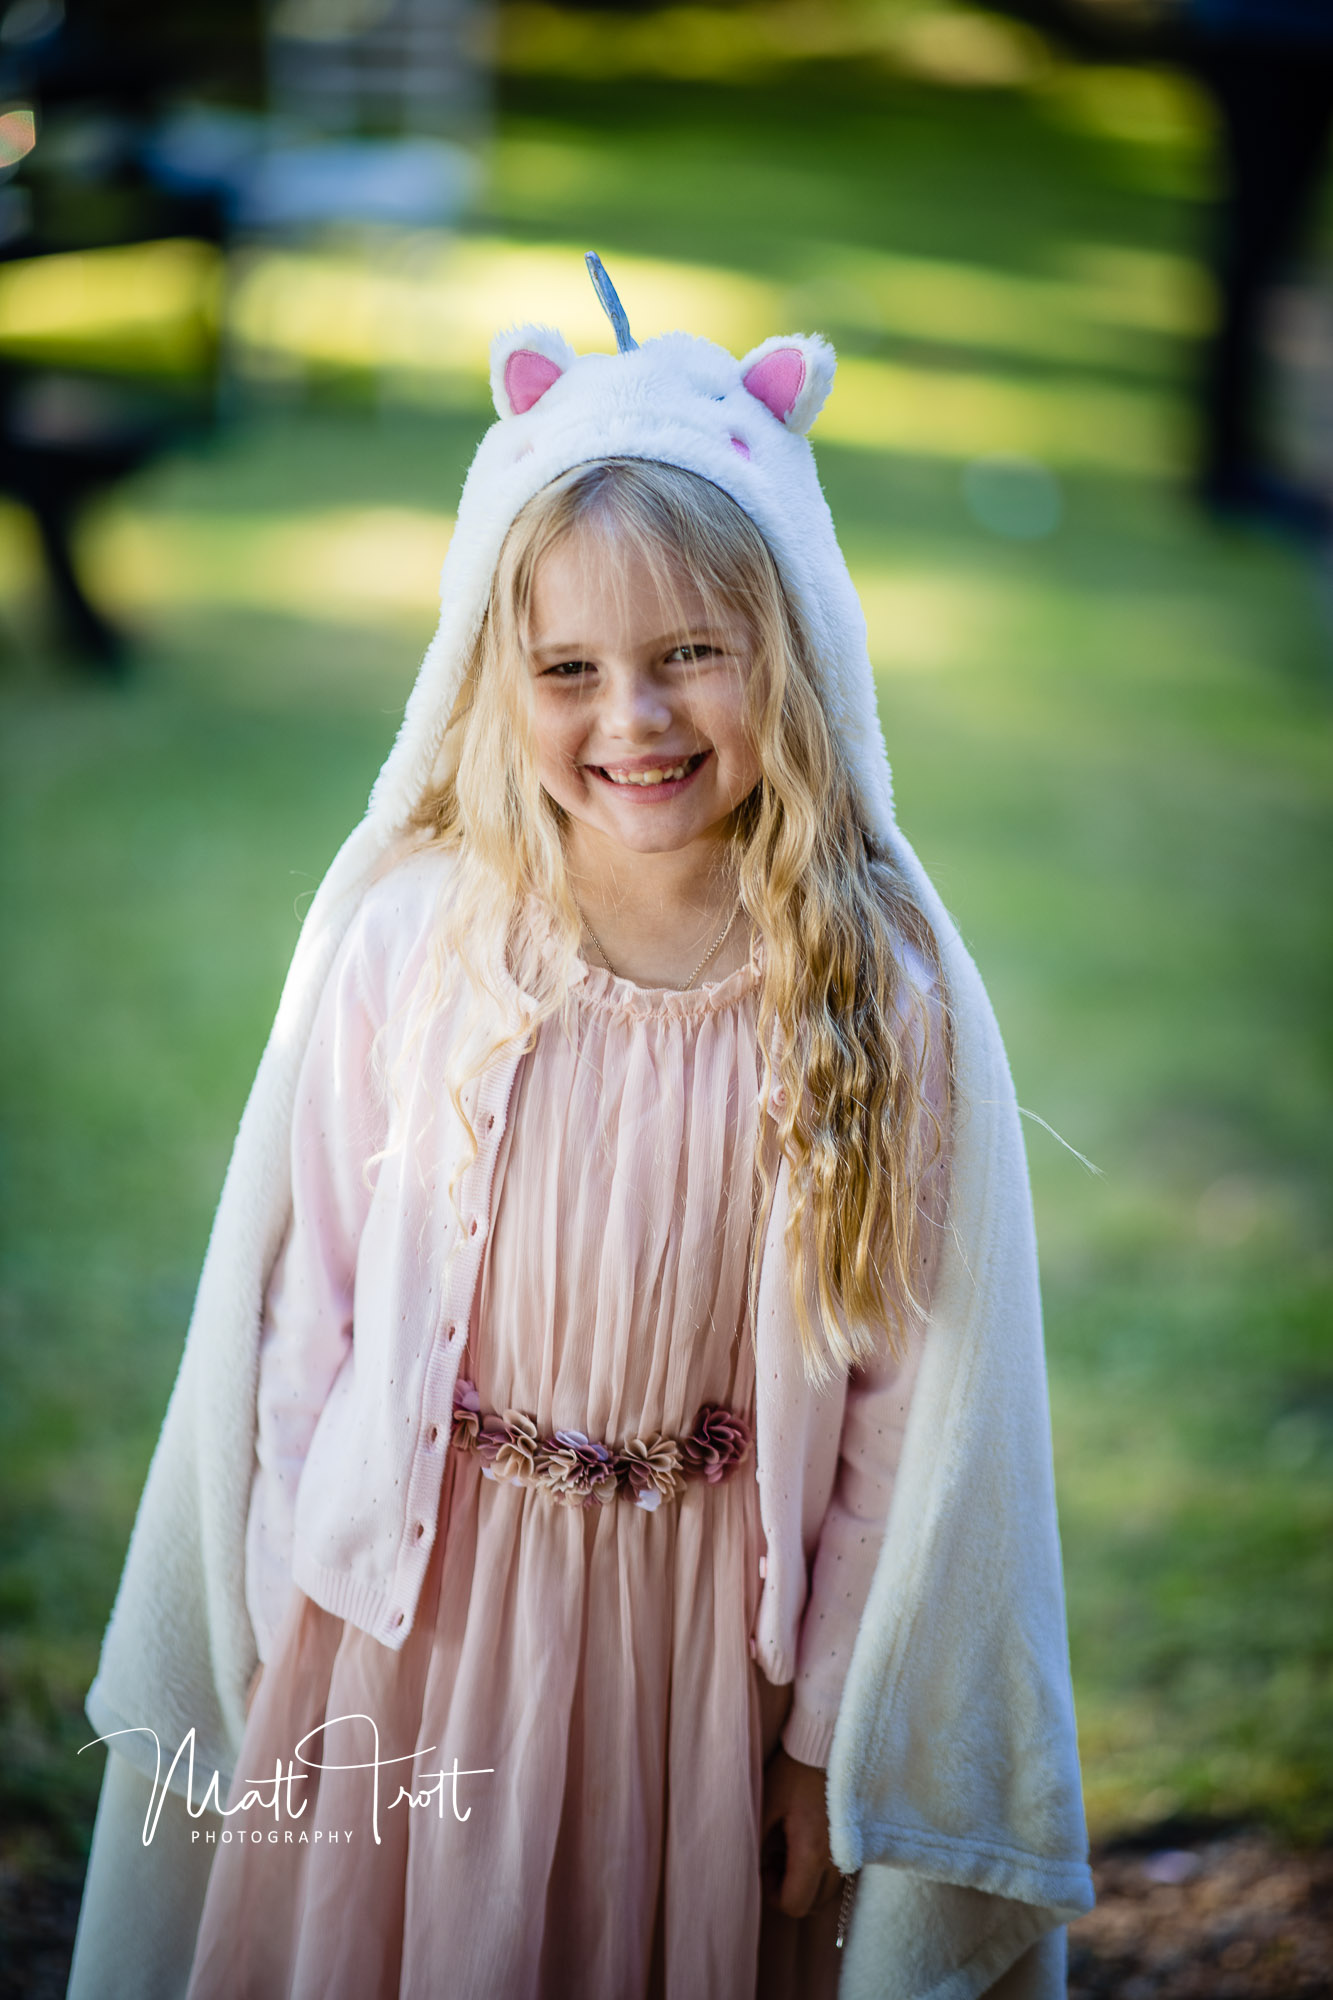 Young flower girl at a wedding with a unicorn jumper over her head